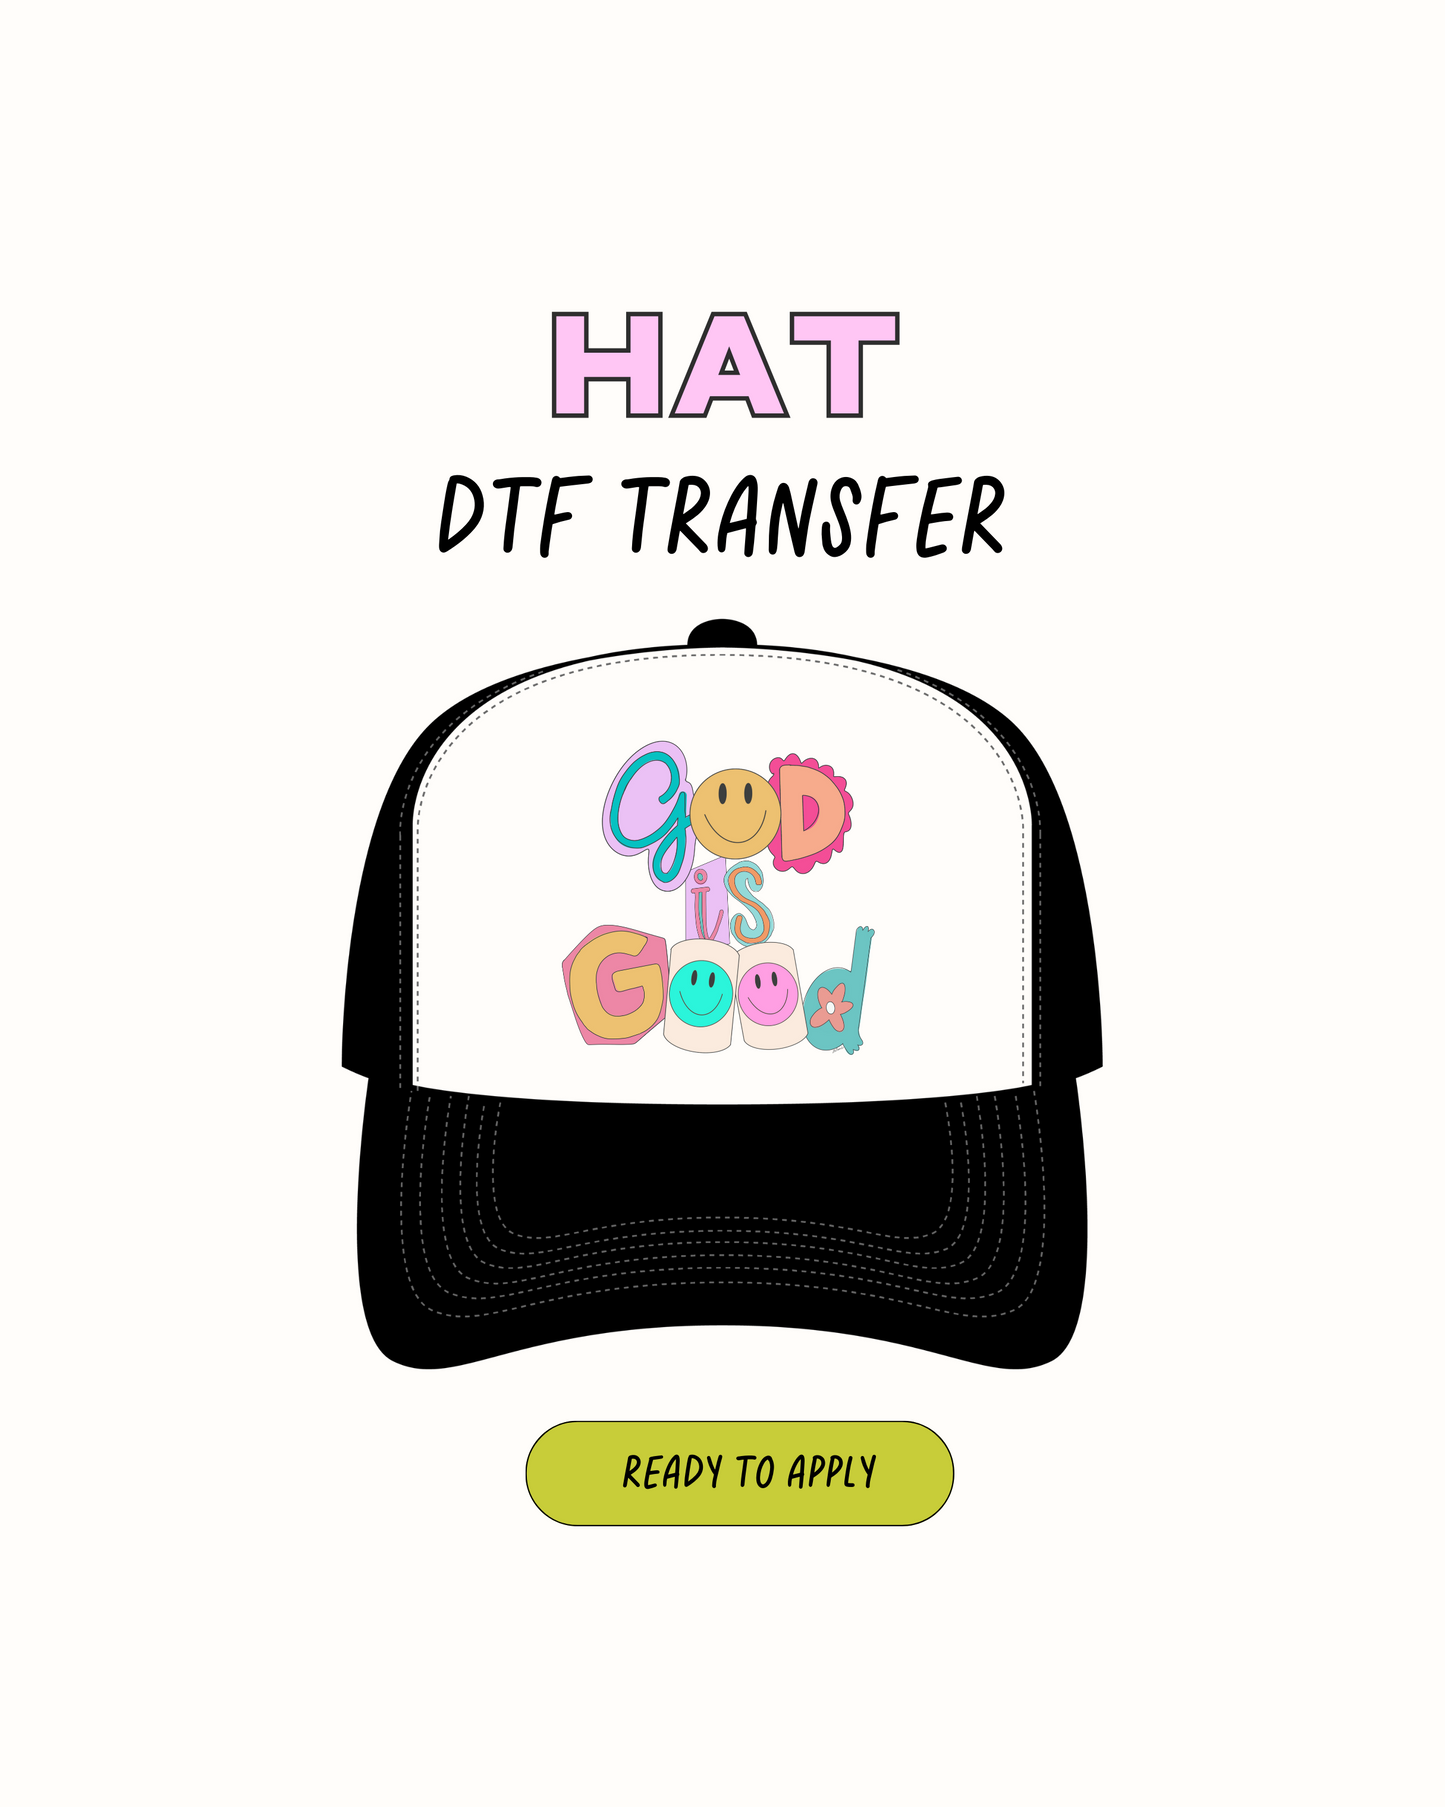 Good is good - DTF Hat Transfers